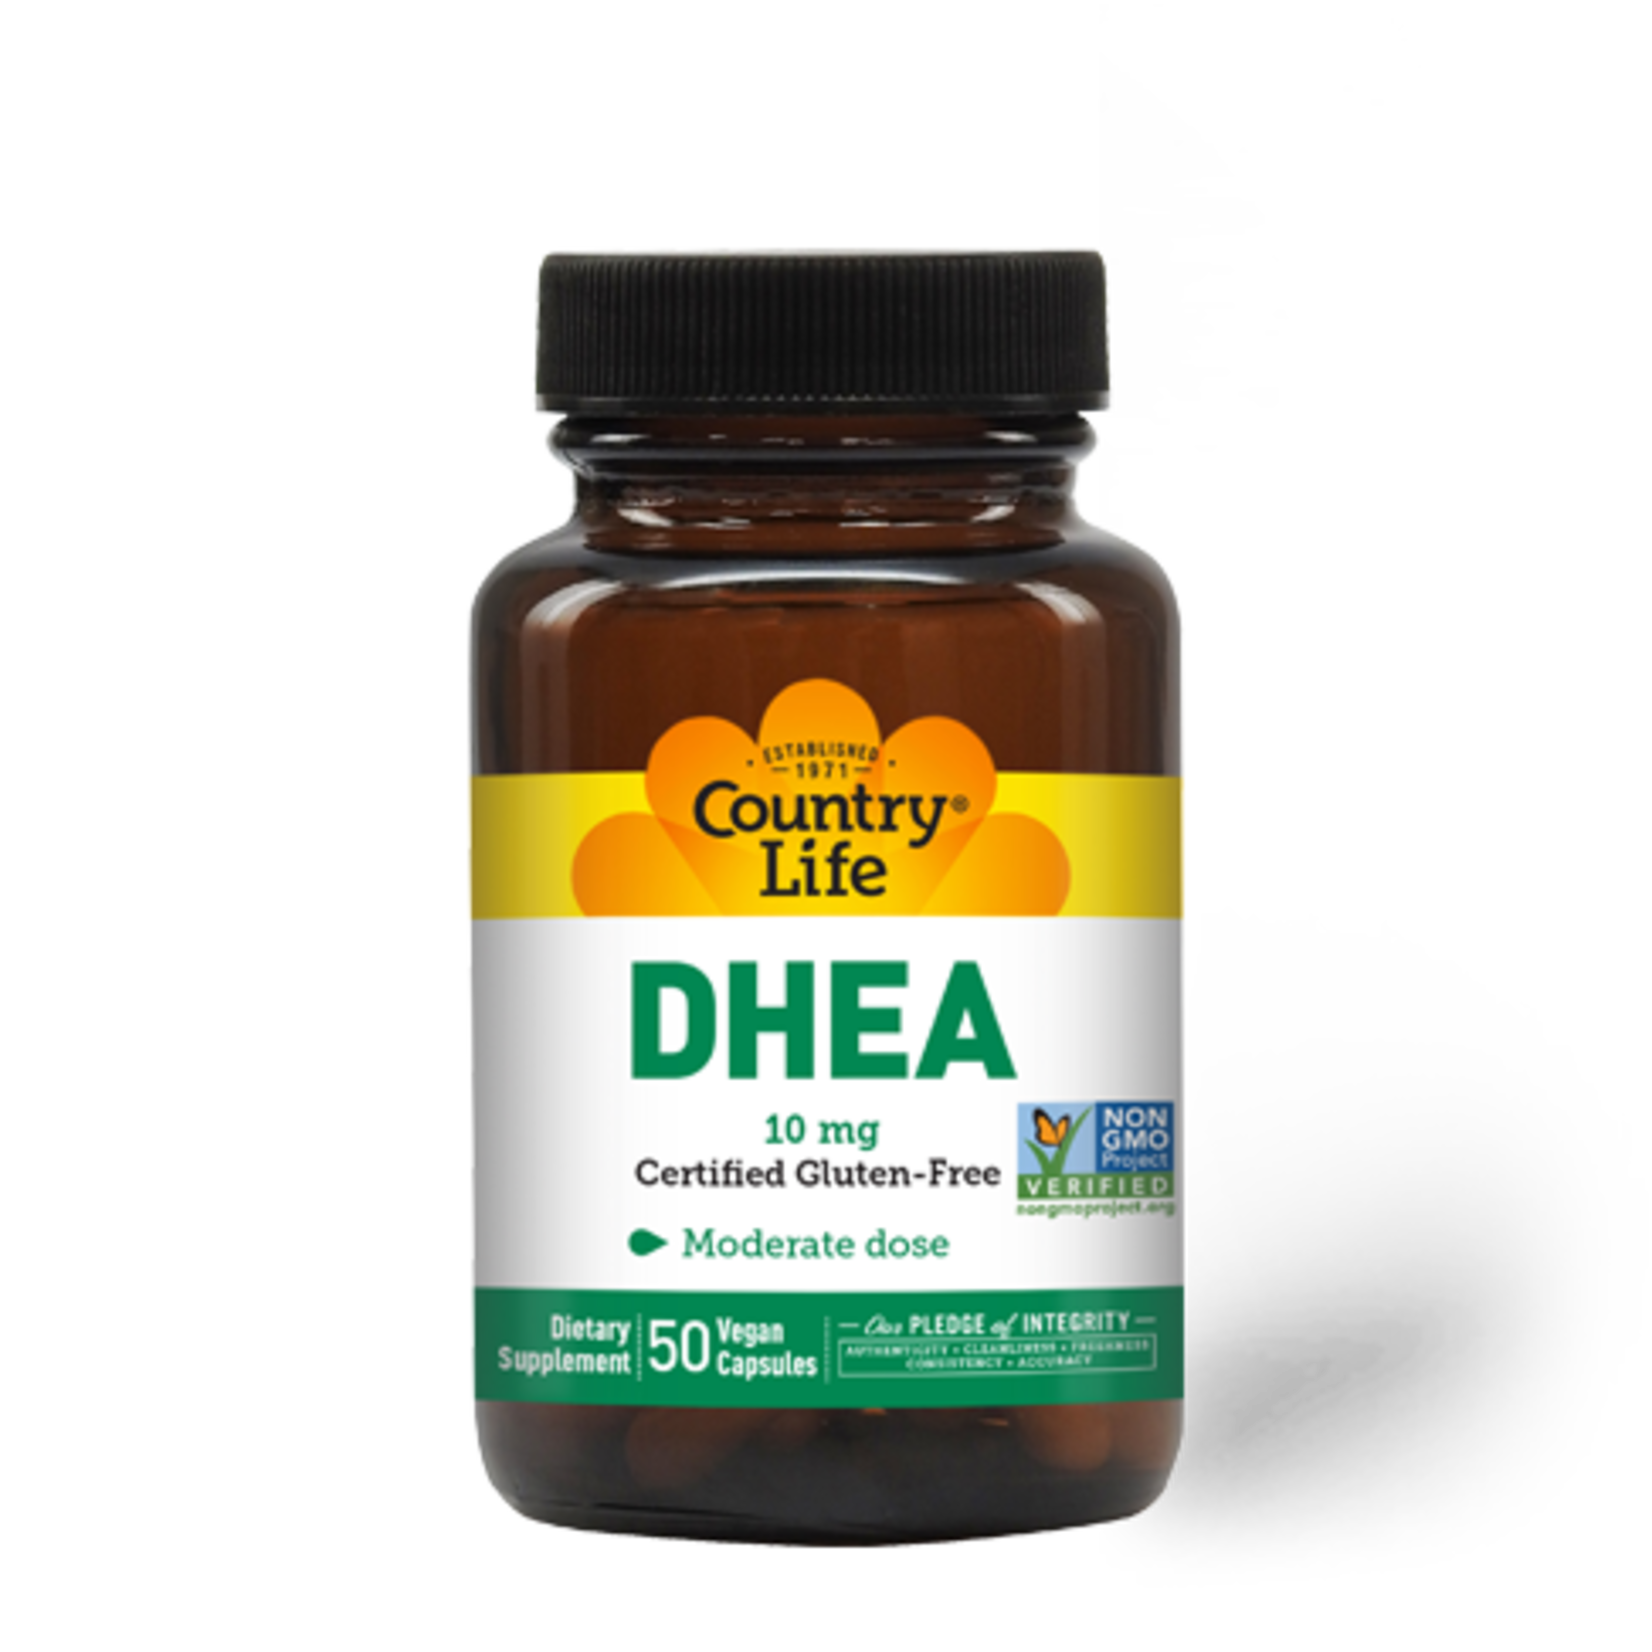 Country Life Country Life - Dhea 10 mg - 50 Veg Capsules